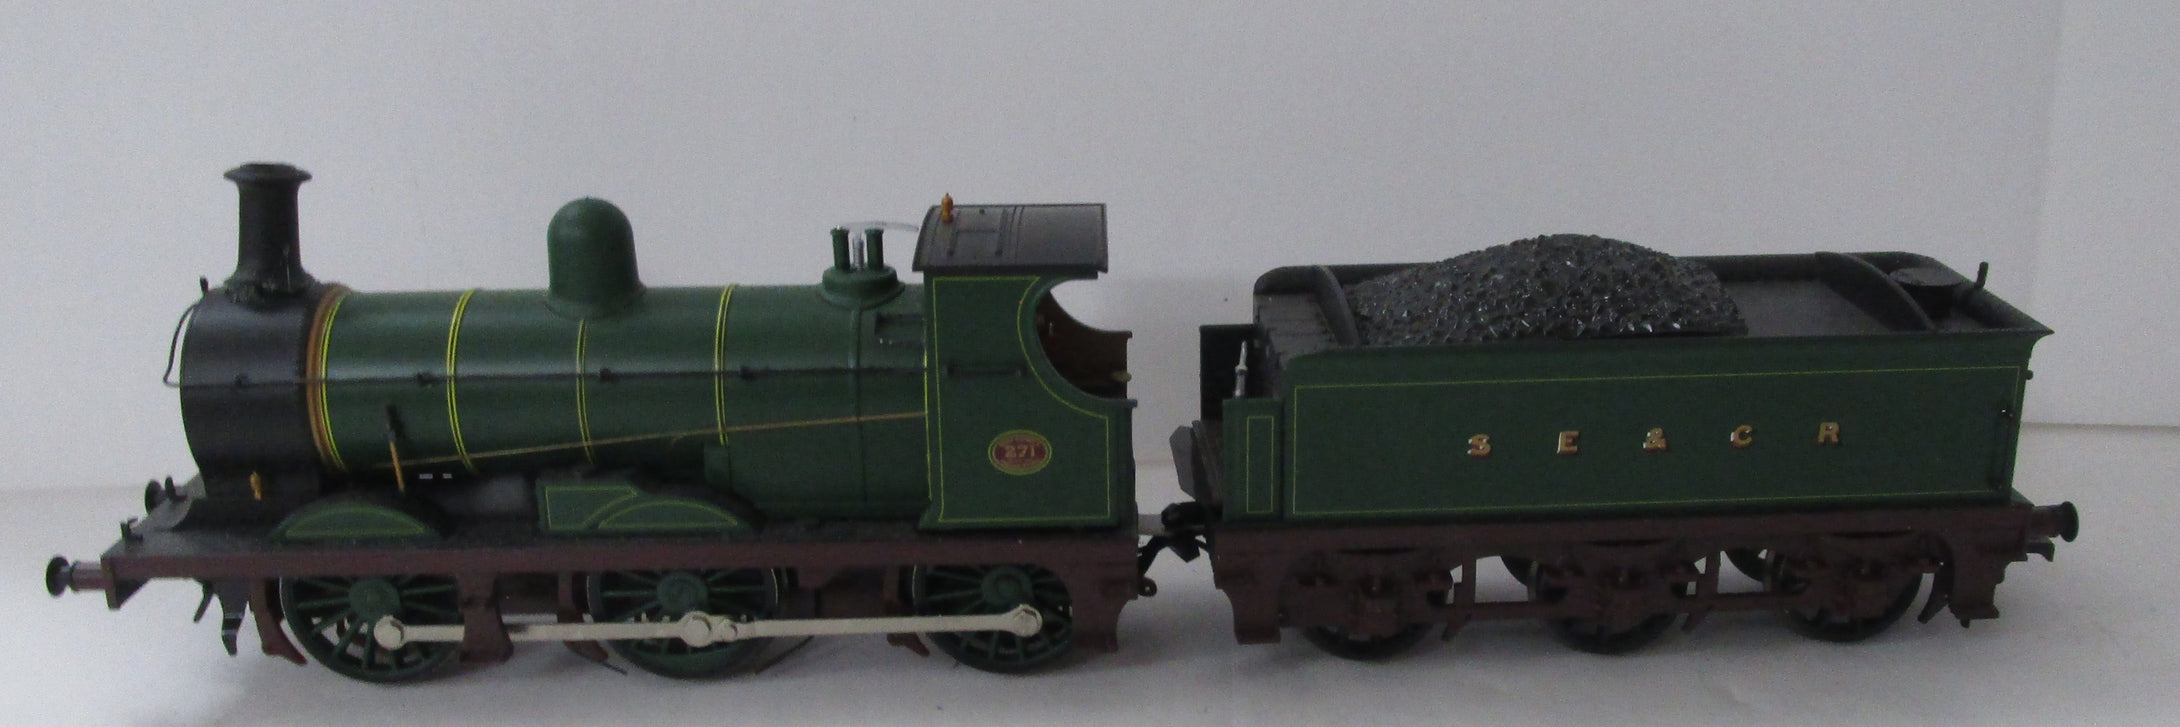 31-453 BACHMANN C Class 271 0-6-0 SE$CR lined green -BOXED